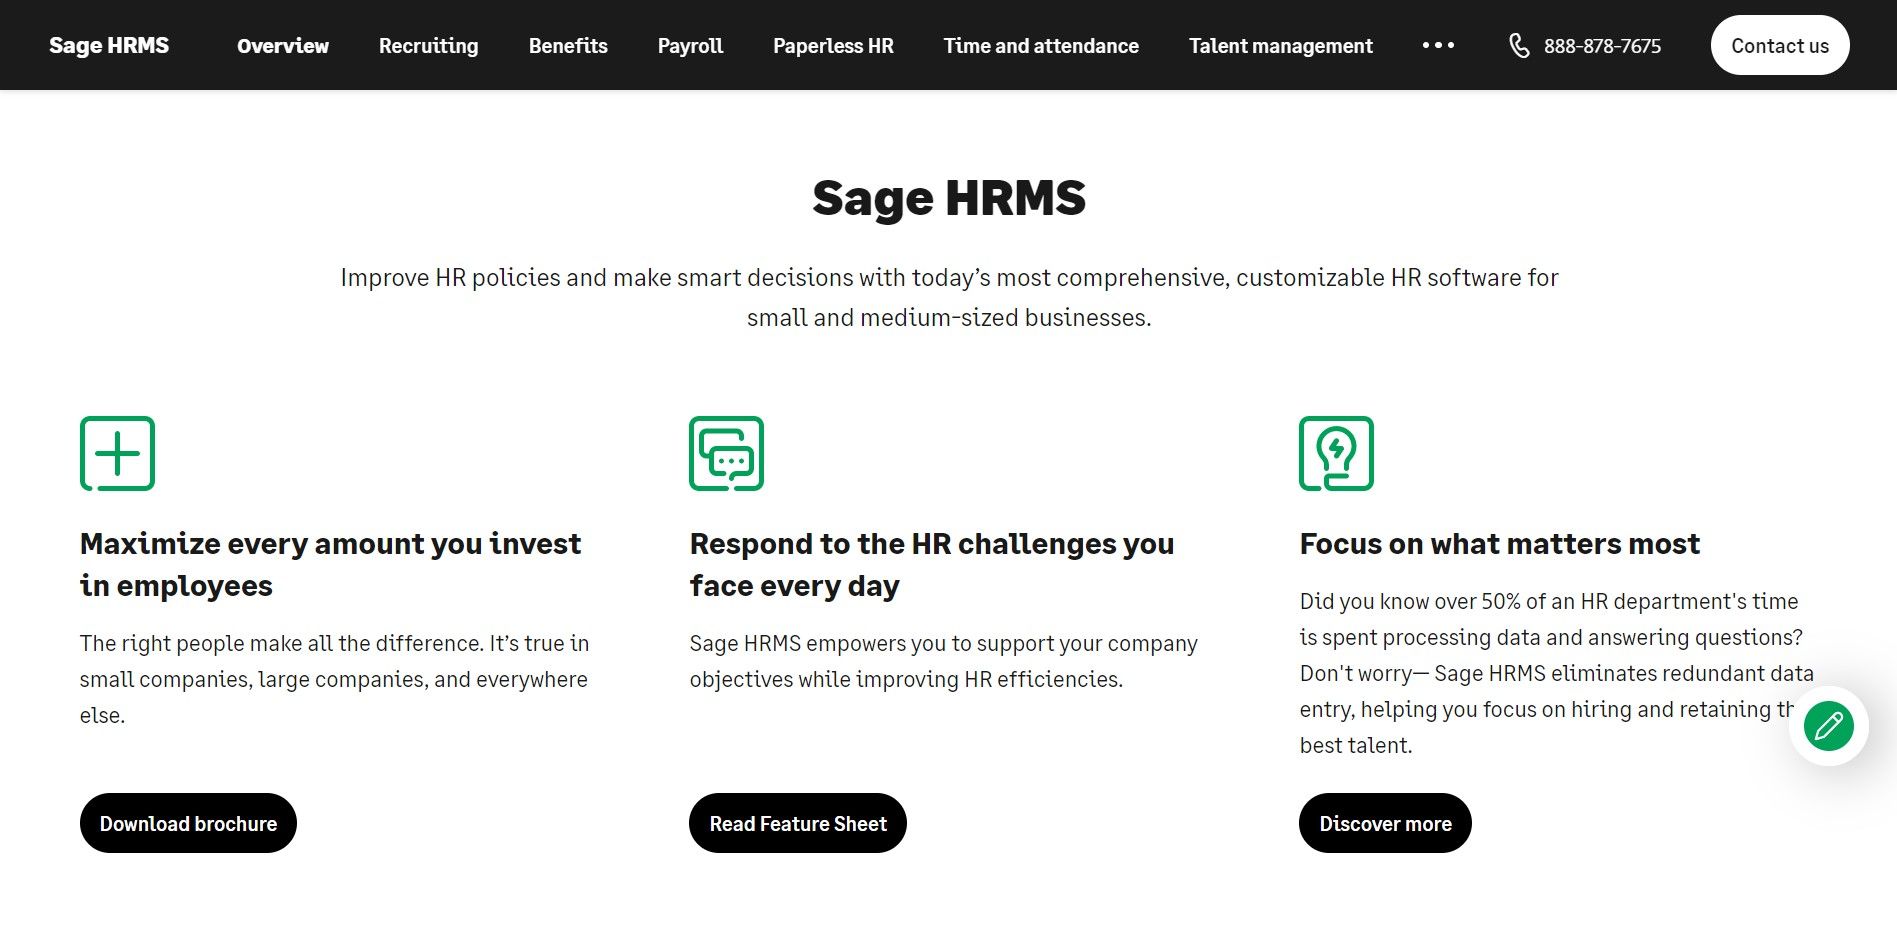 An image of Sage HRMS, a outstanding HR software for UAE